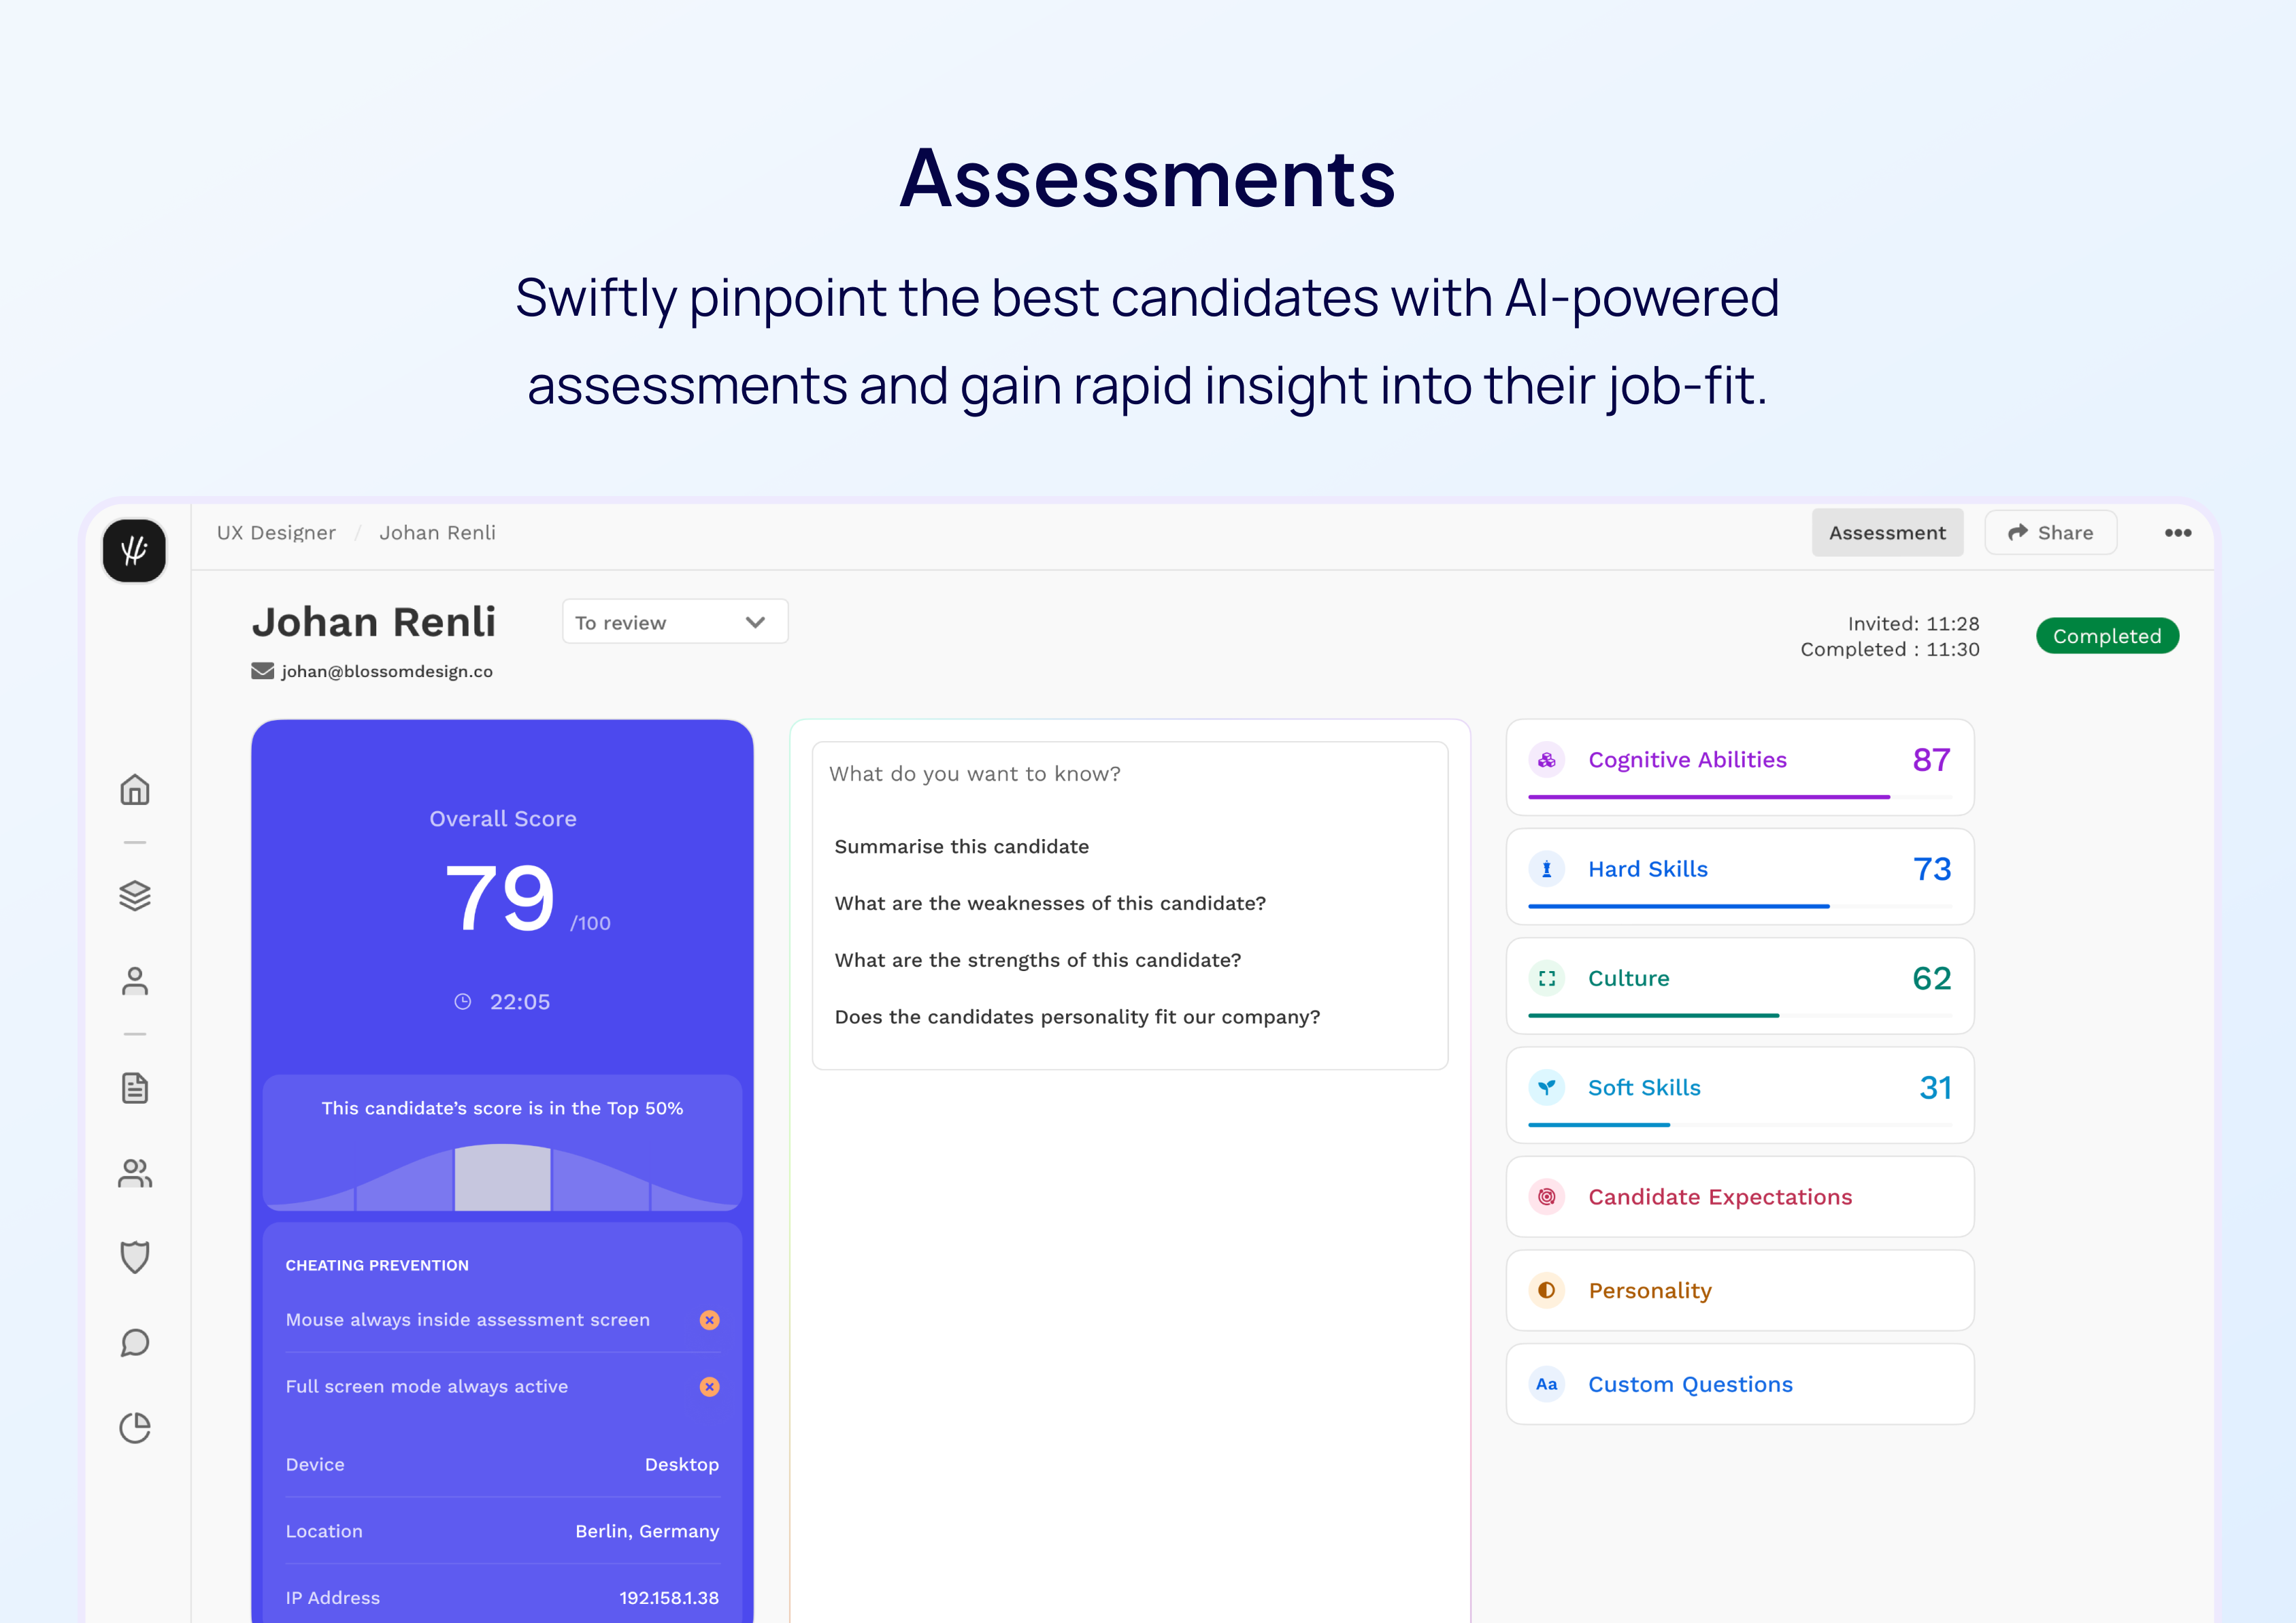 AI-Powered Assessments
Swiftly pinpoint the best candidates with AI-powered assessments and gain rapid insight into their job-fit.